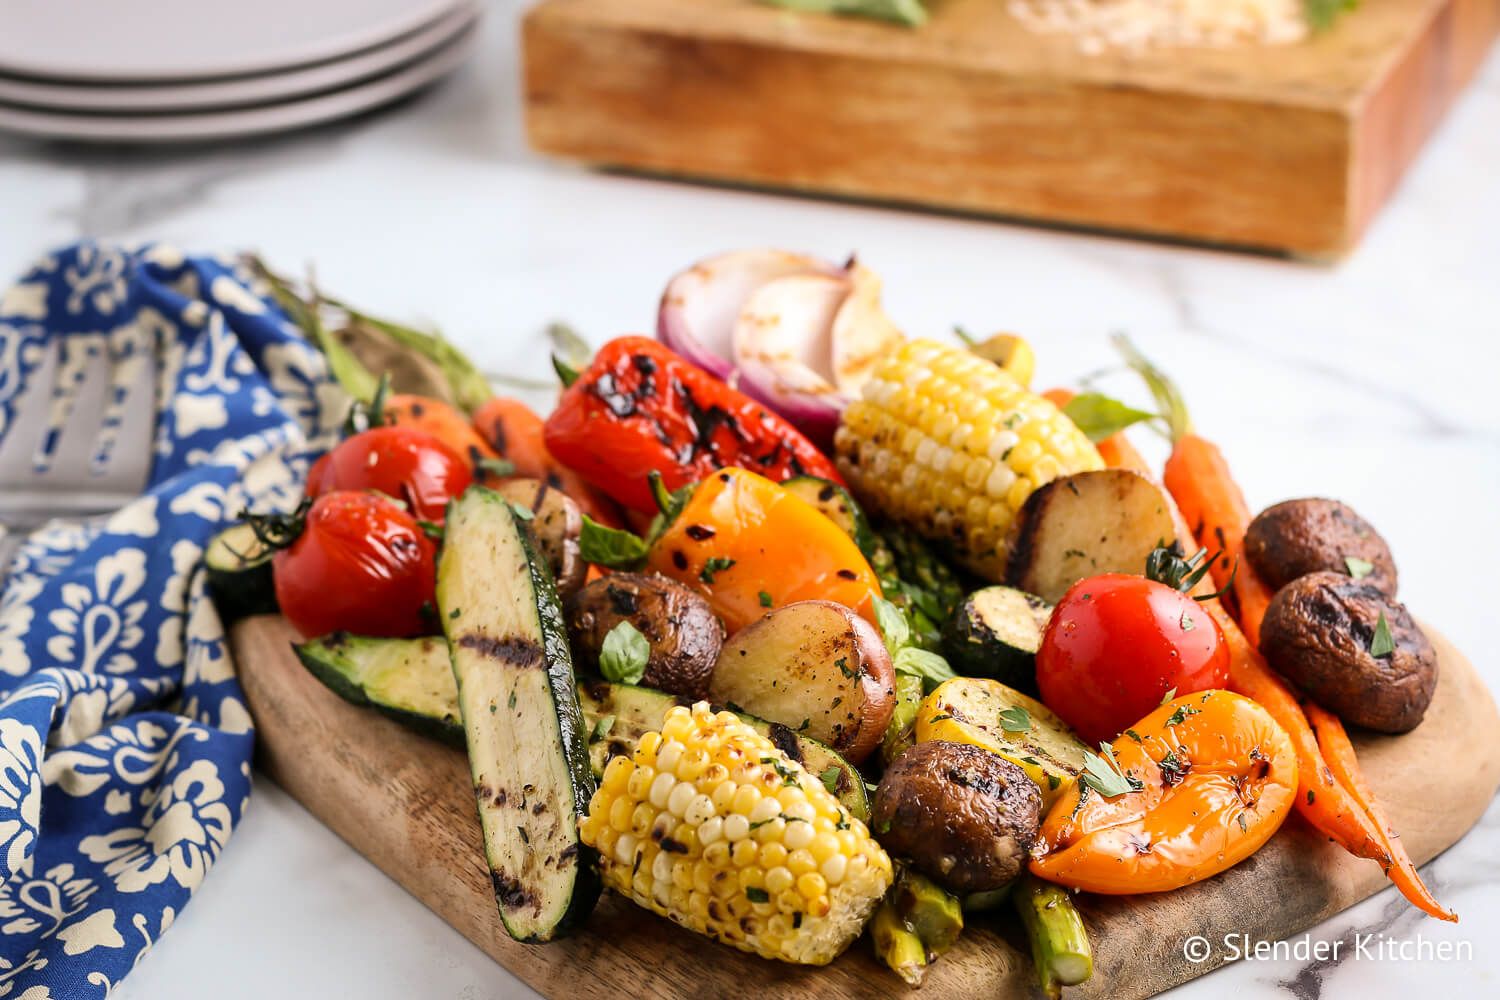 Grilled vegetables on a cutting board including corn, zucchini, peppers, and mushrooms.